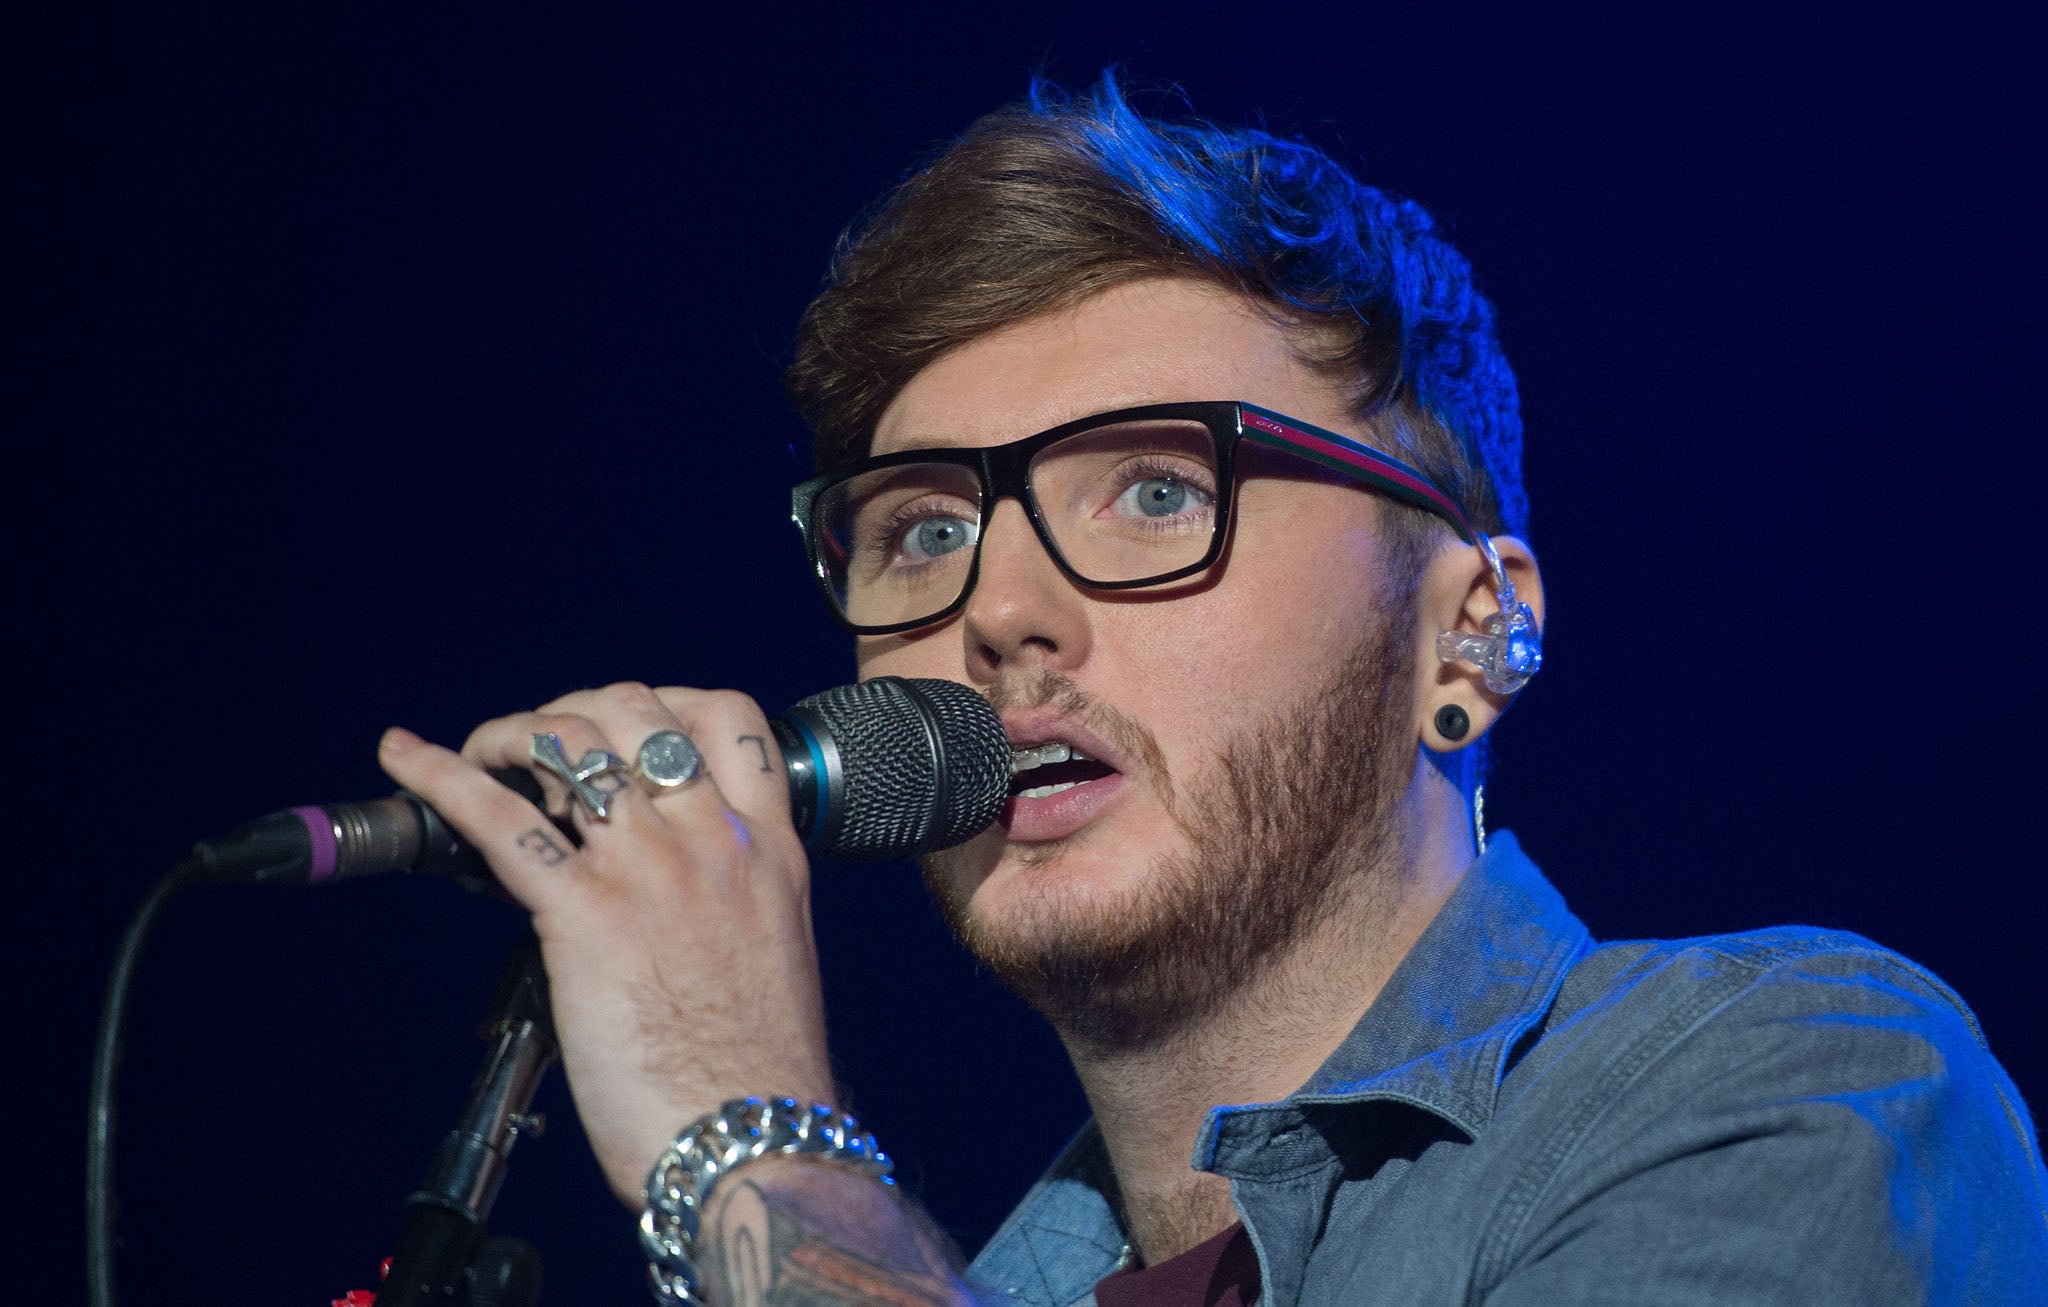 X Factor winner James Arthur has been dropped from Simon Cowell's record label